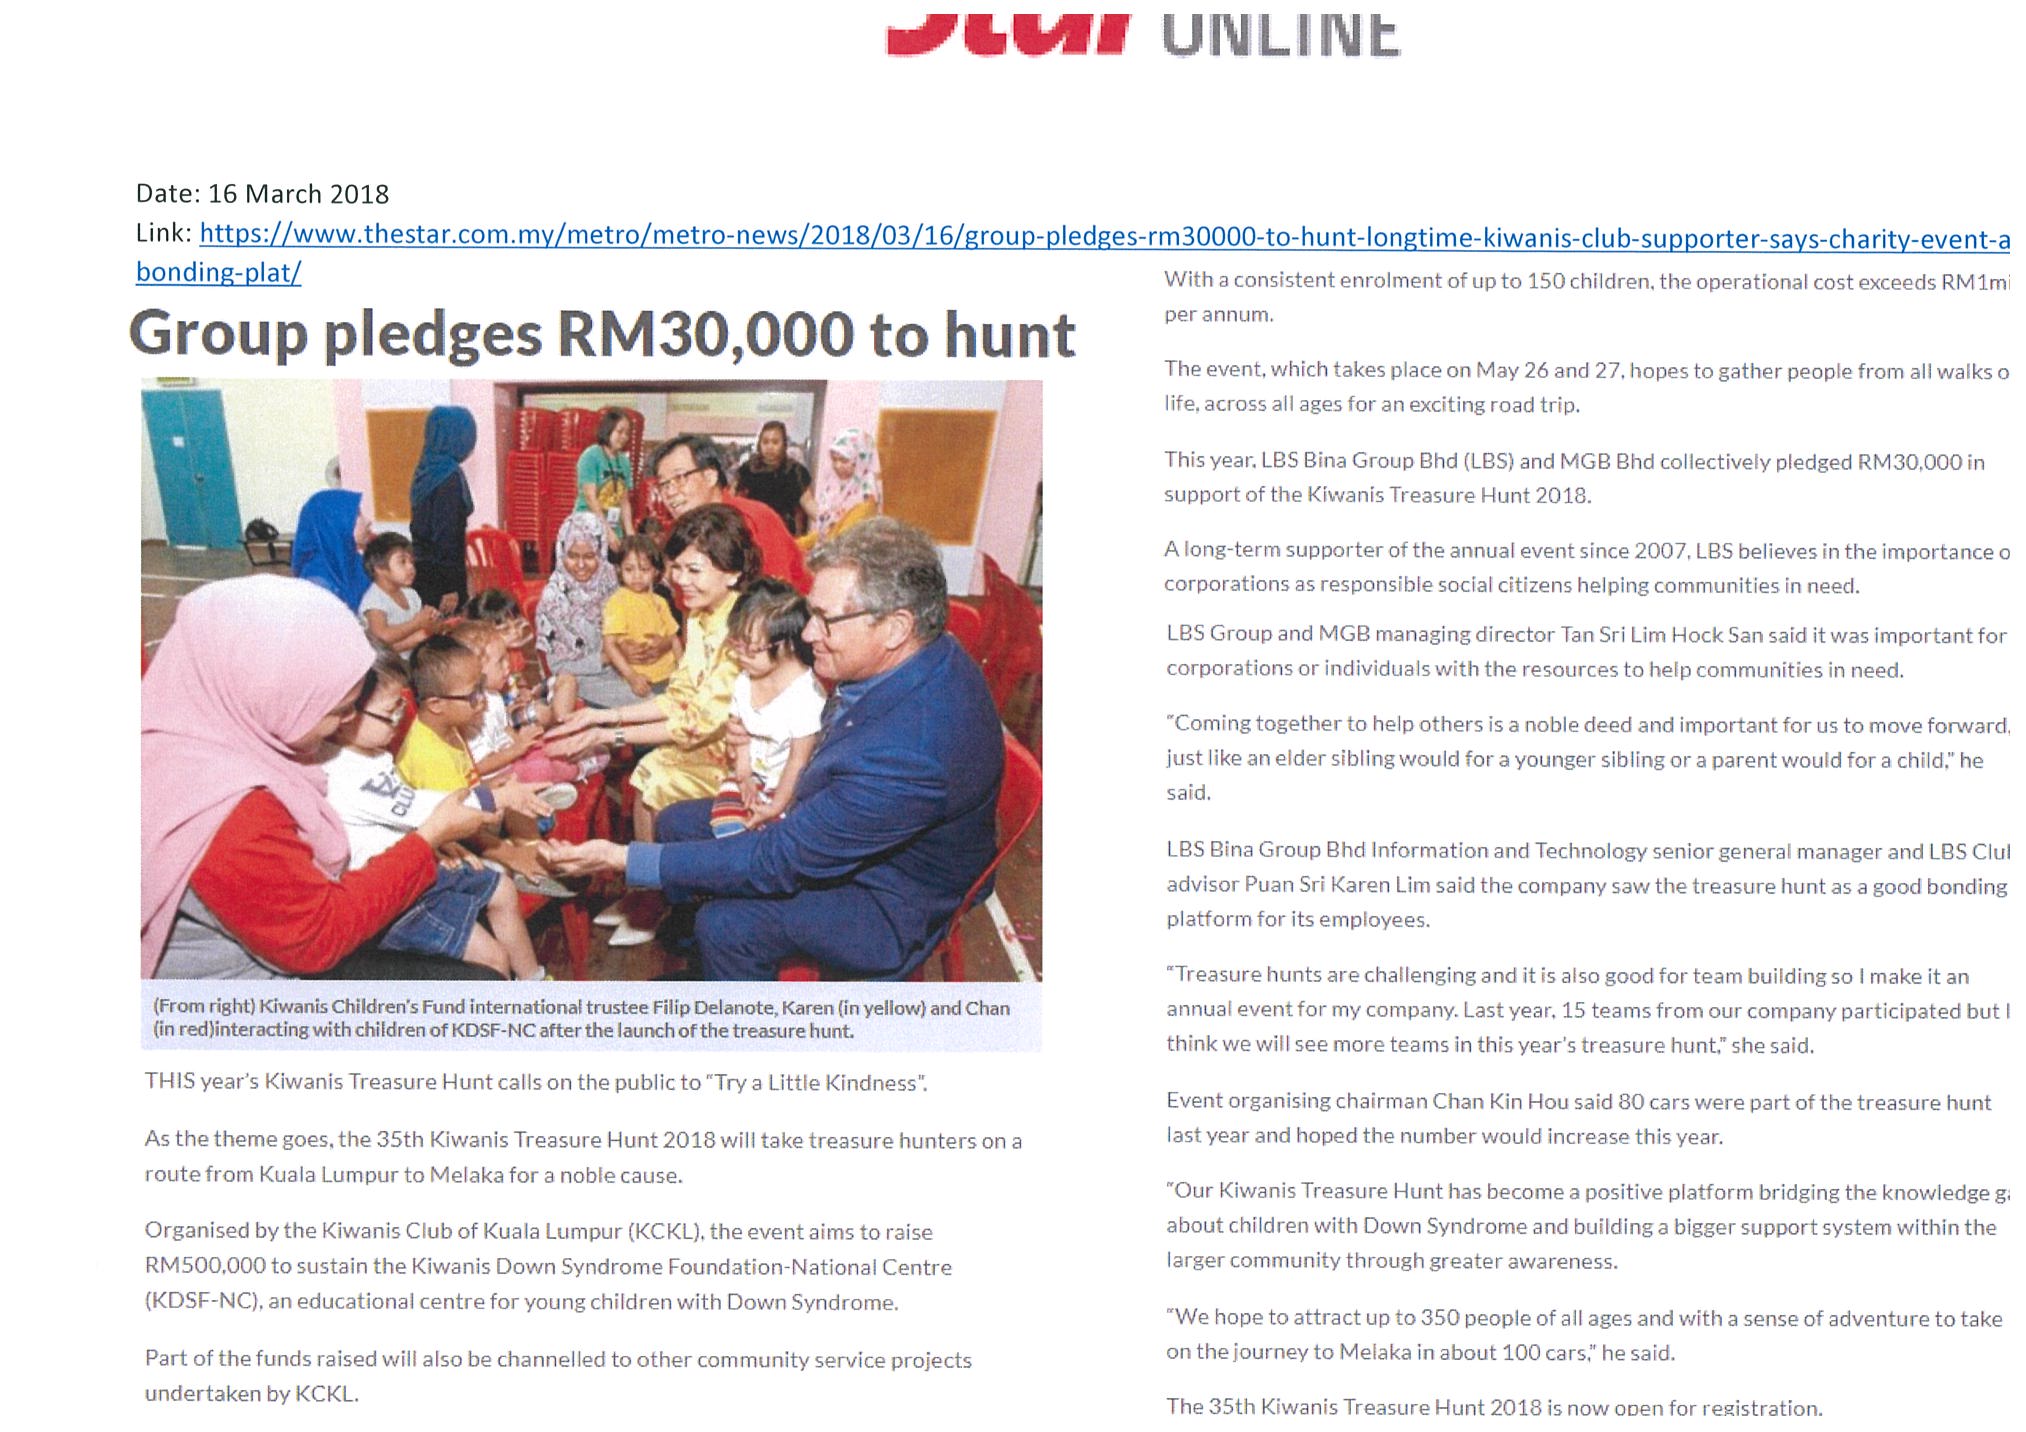 2018.03.16 The Star Online – Group pledges RM30,000 to hunt